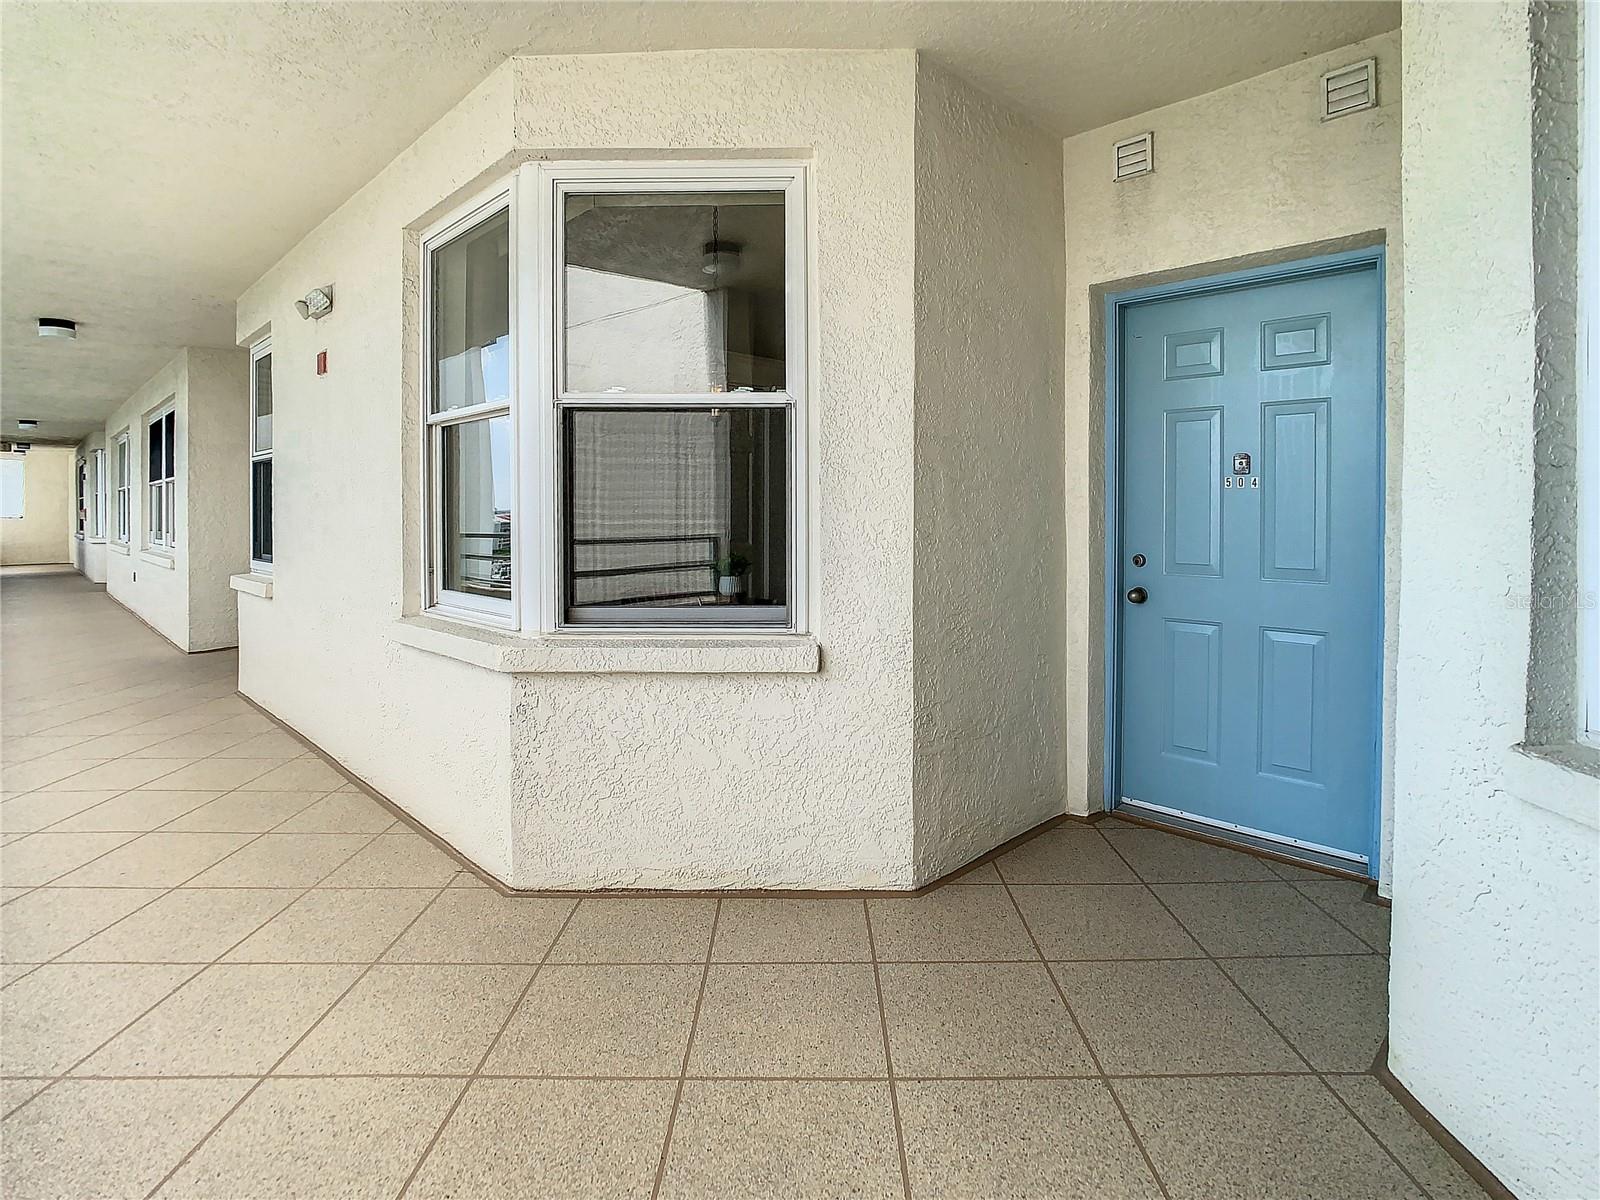 This is your entrance to this fabulous condo.  Notice the nice kitchen windows that you have for a great waterview from the kitchen